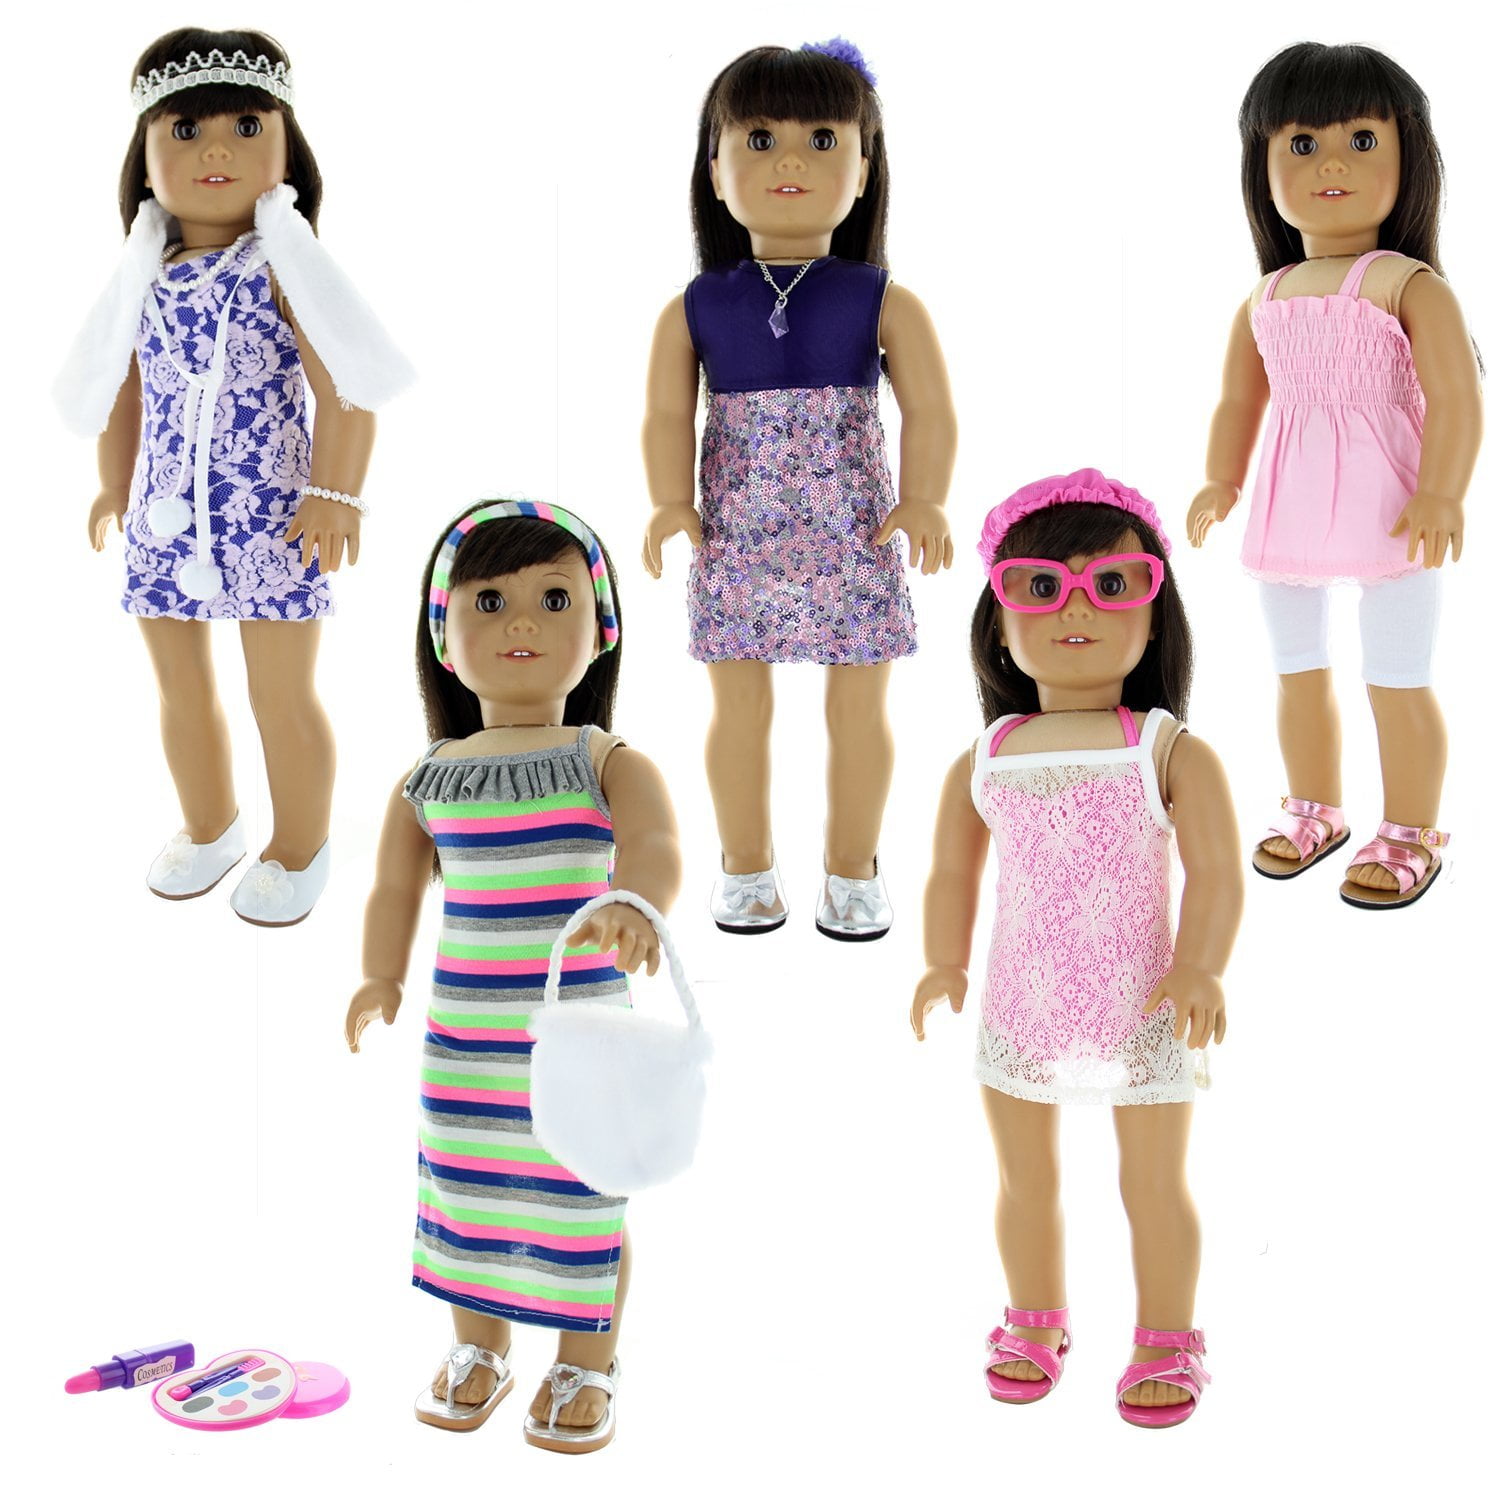 Doll Clothes - 24 Pieces Clothing Set Fits American Girl & Other